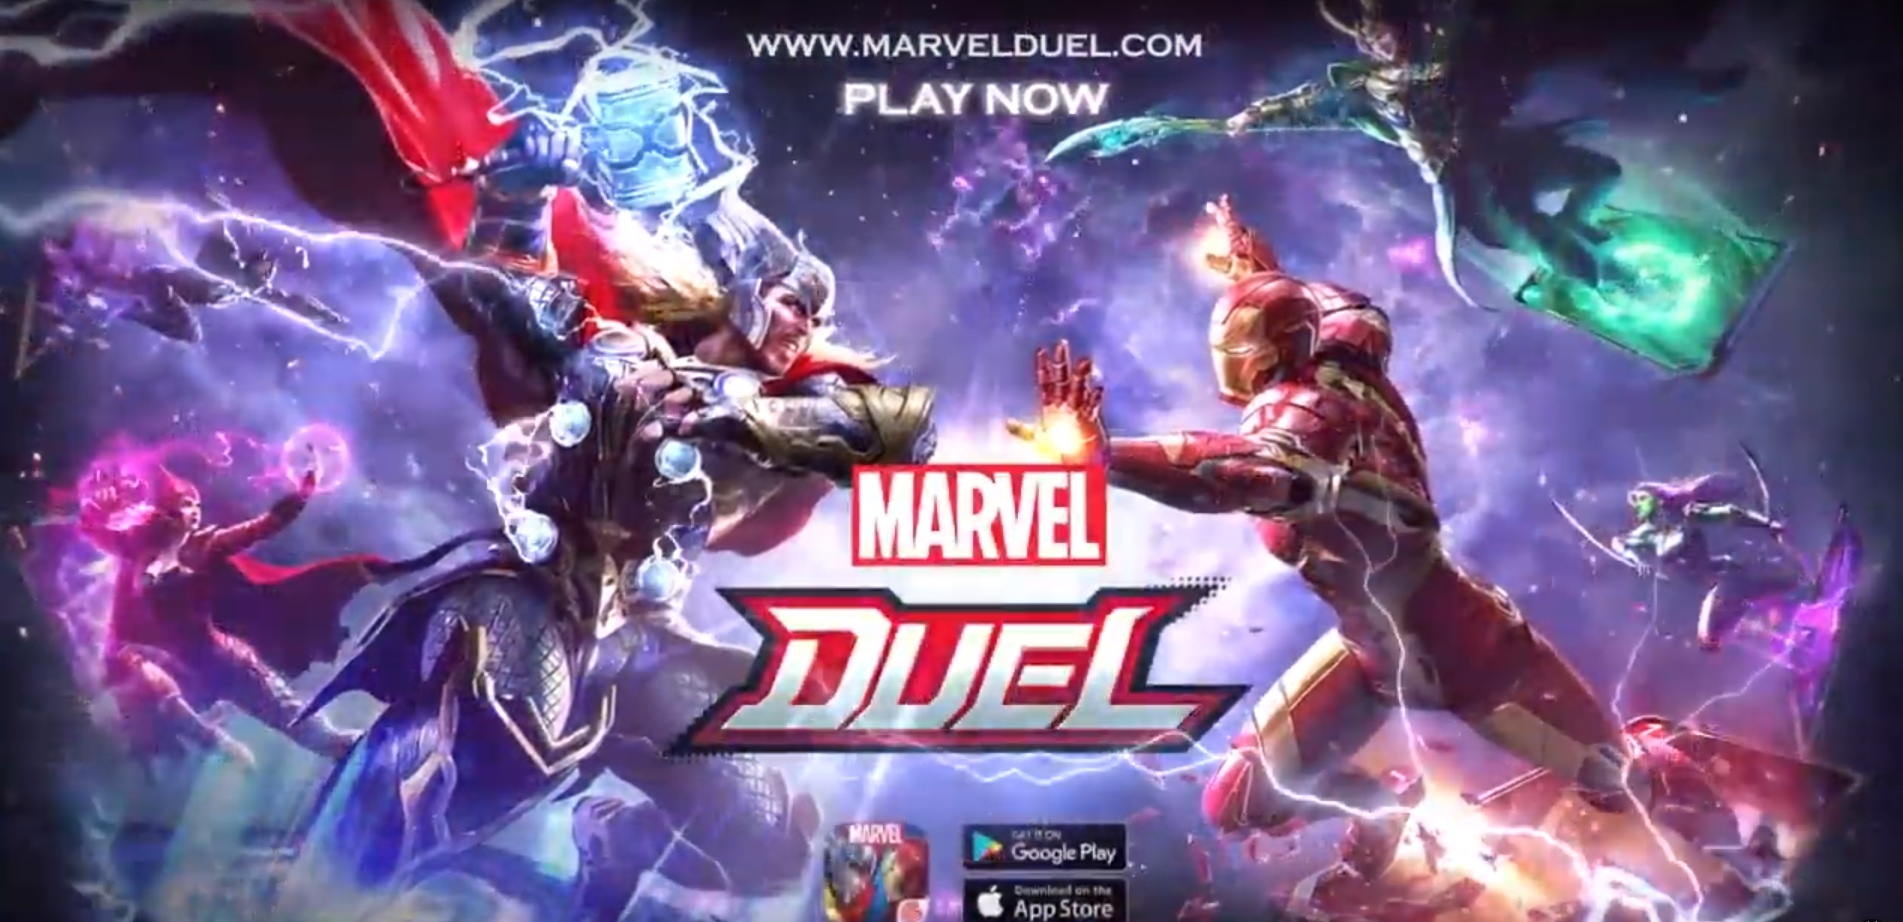 Marvel Duel To Begin Closed Beta Testing Soon Ahead Of Launch